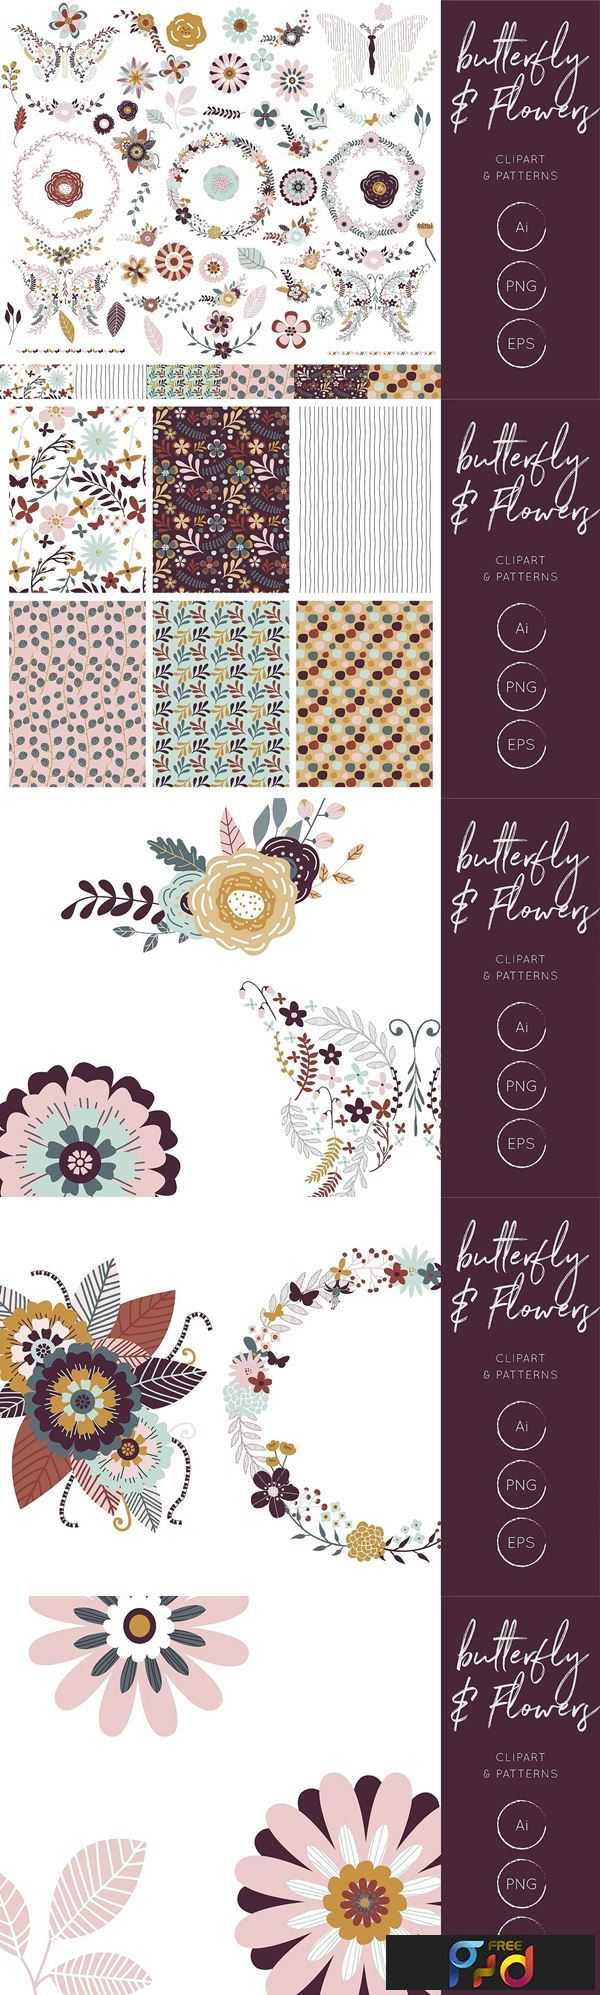 FreePsdVn.com 1807010 VECTOR butterfly flowers clipart and patterns 593830